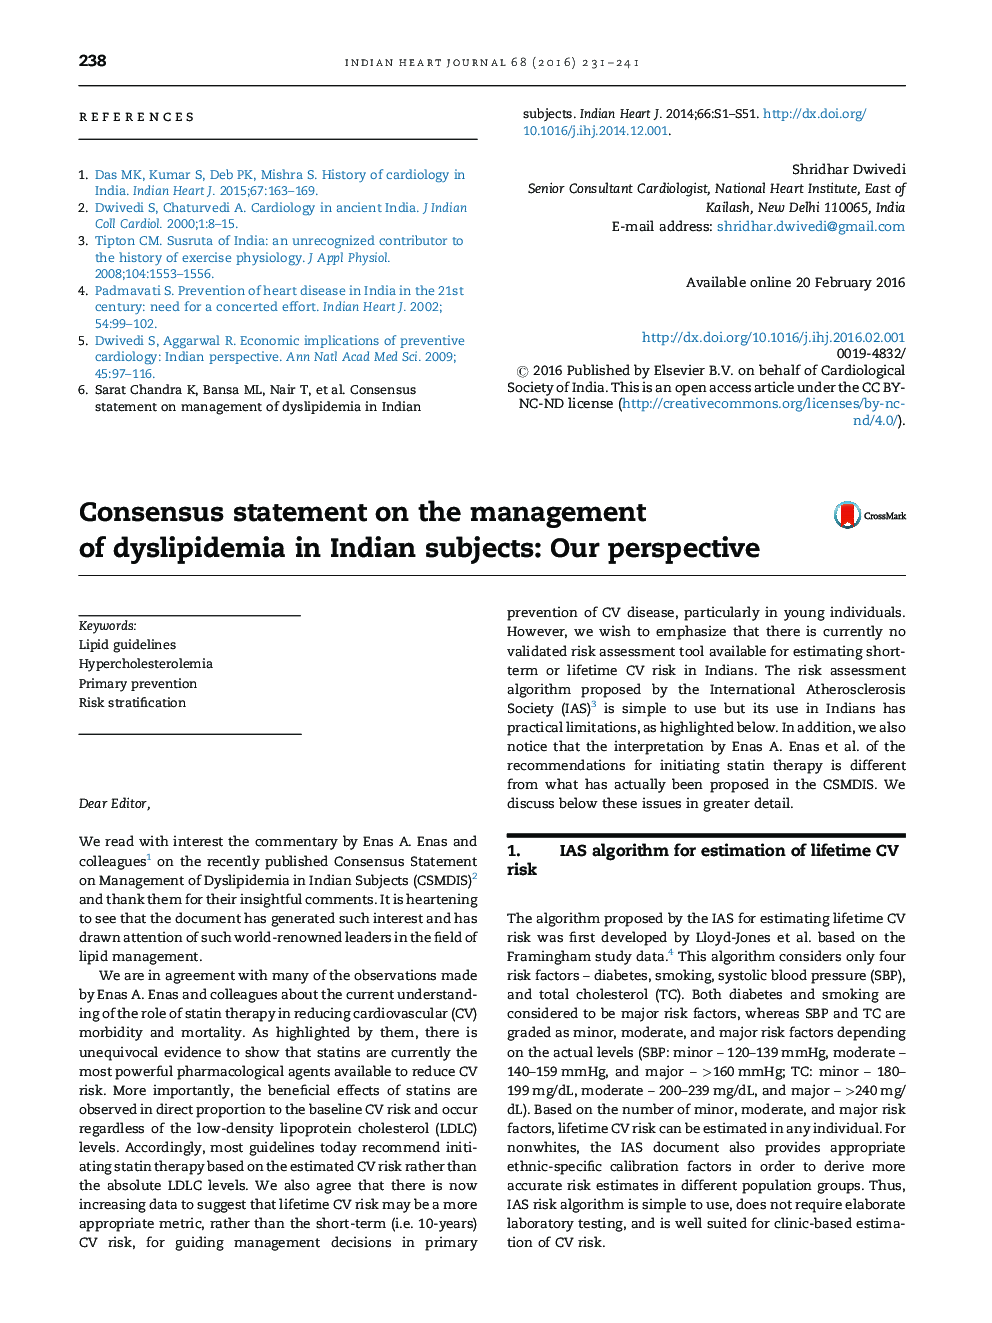 Consensus statement on the management of dyslipidemia in Indian subjects: Our perspective